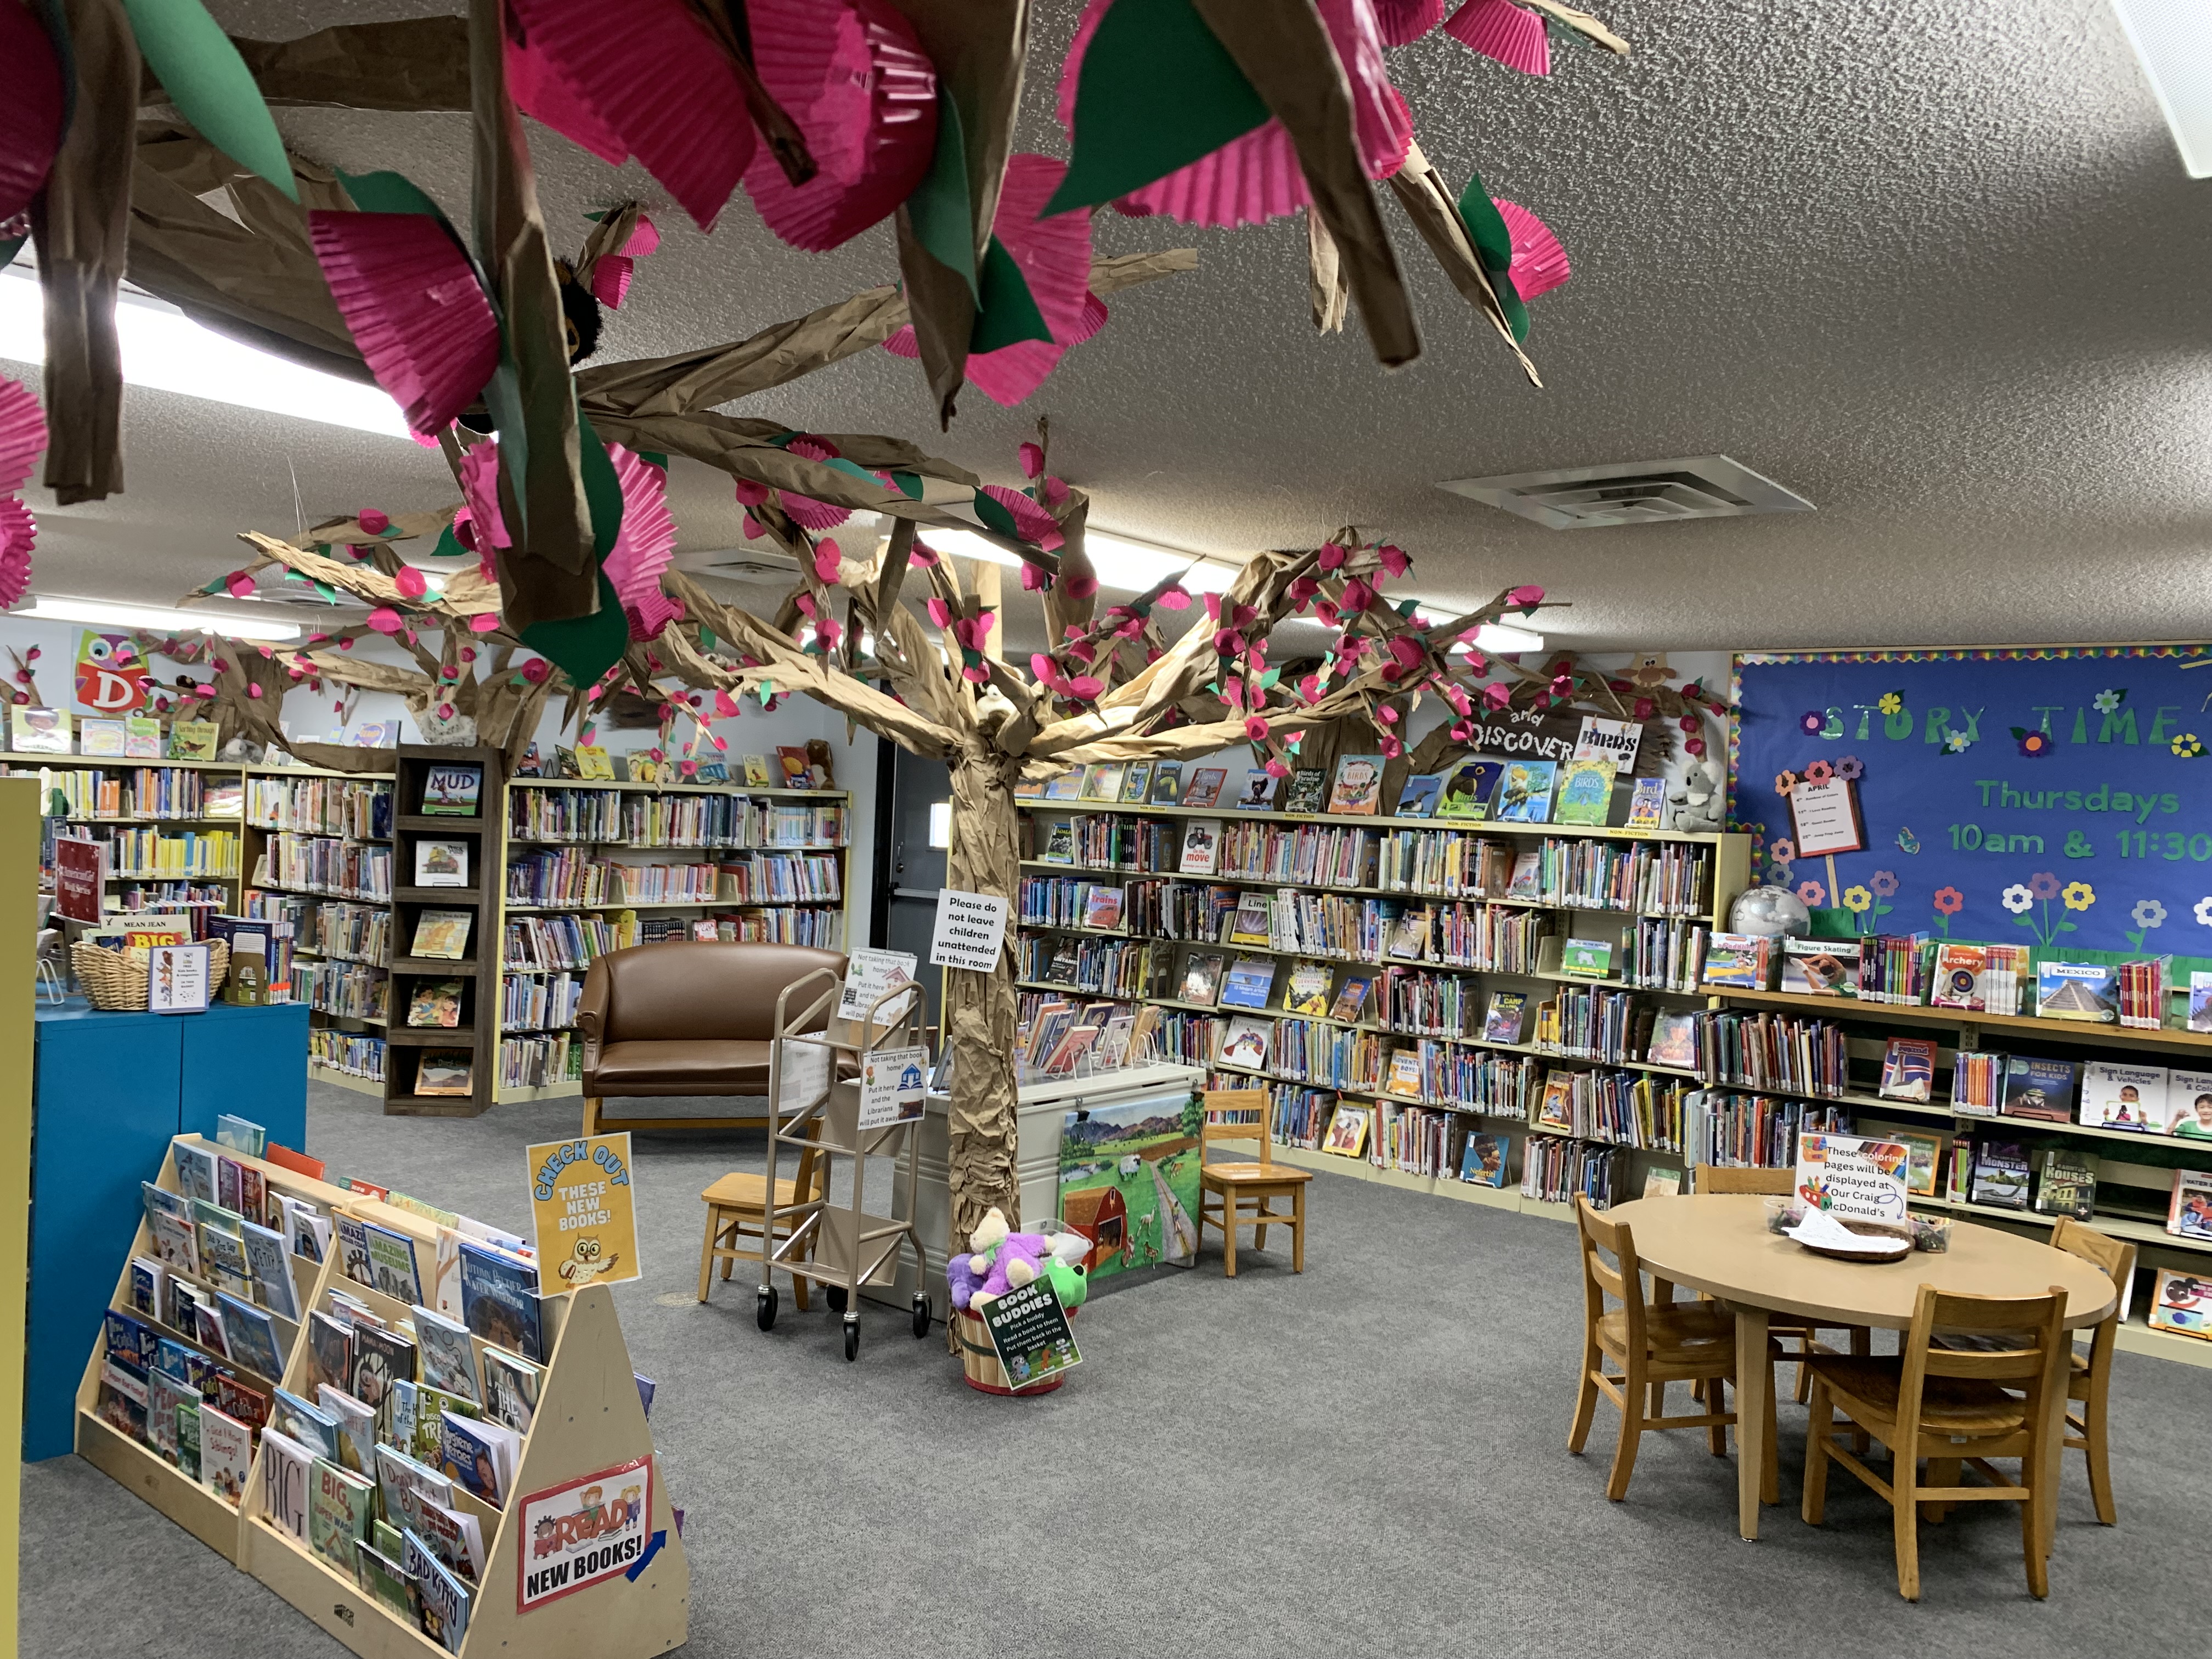 The children’s library room